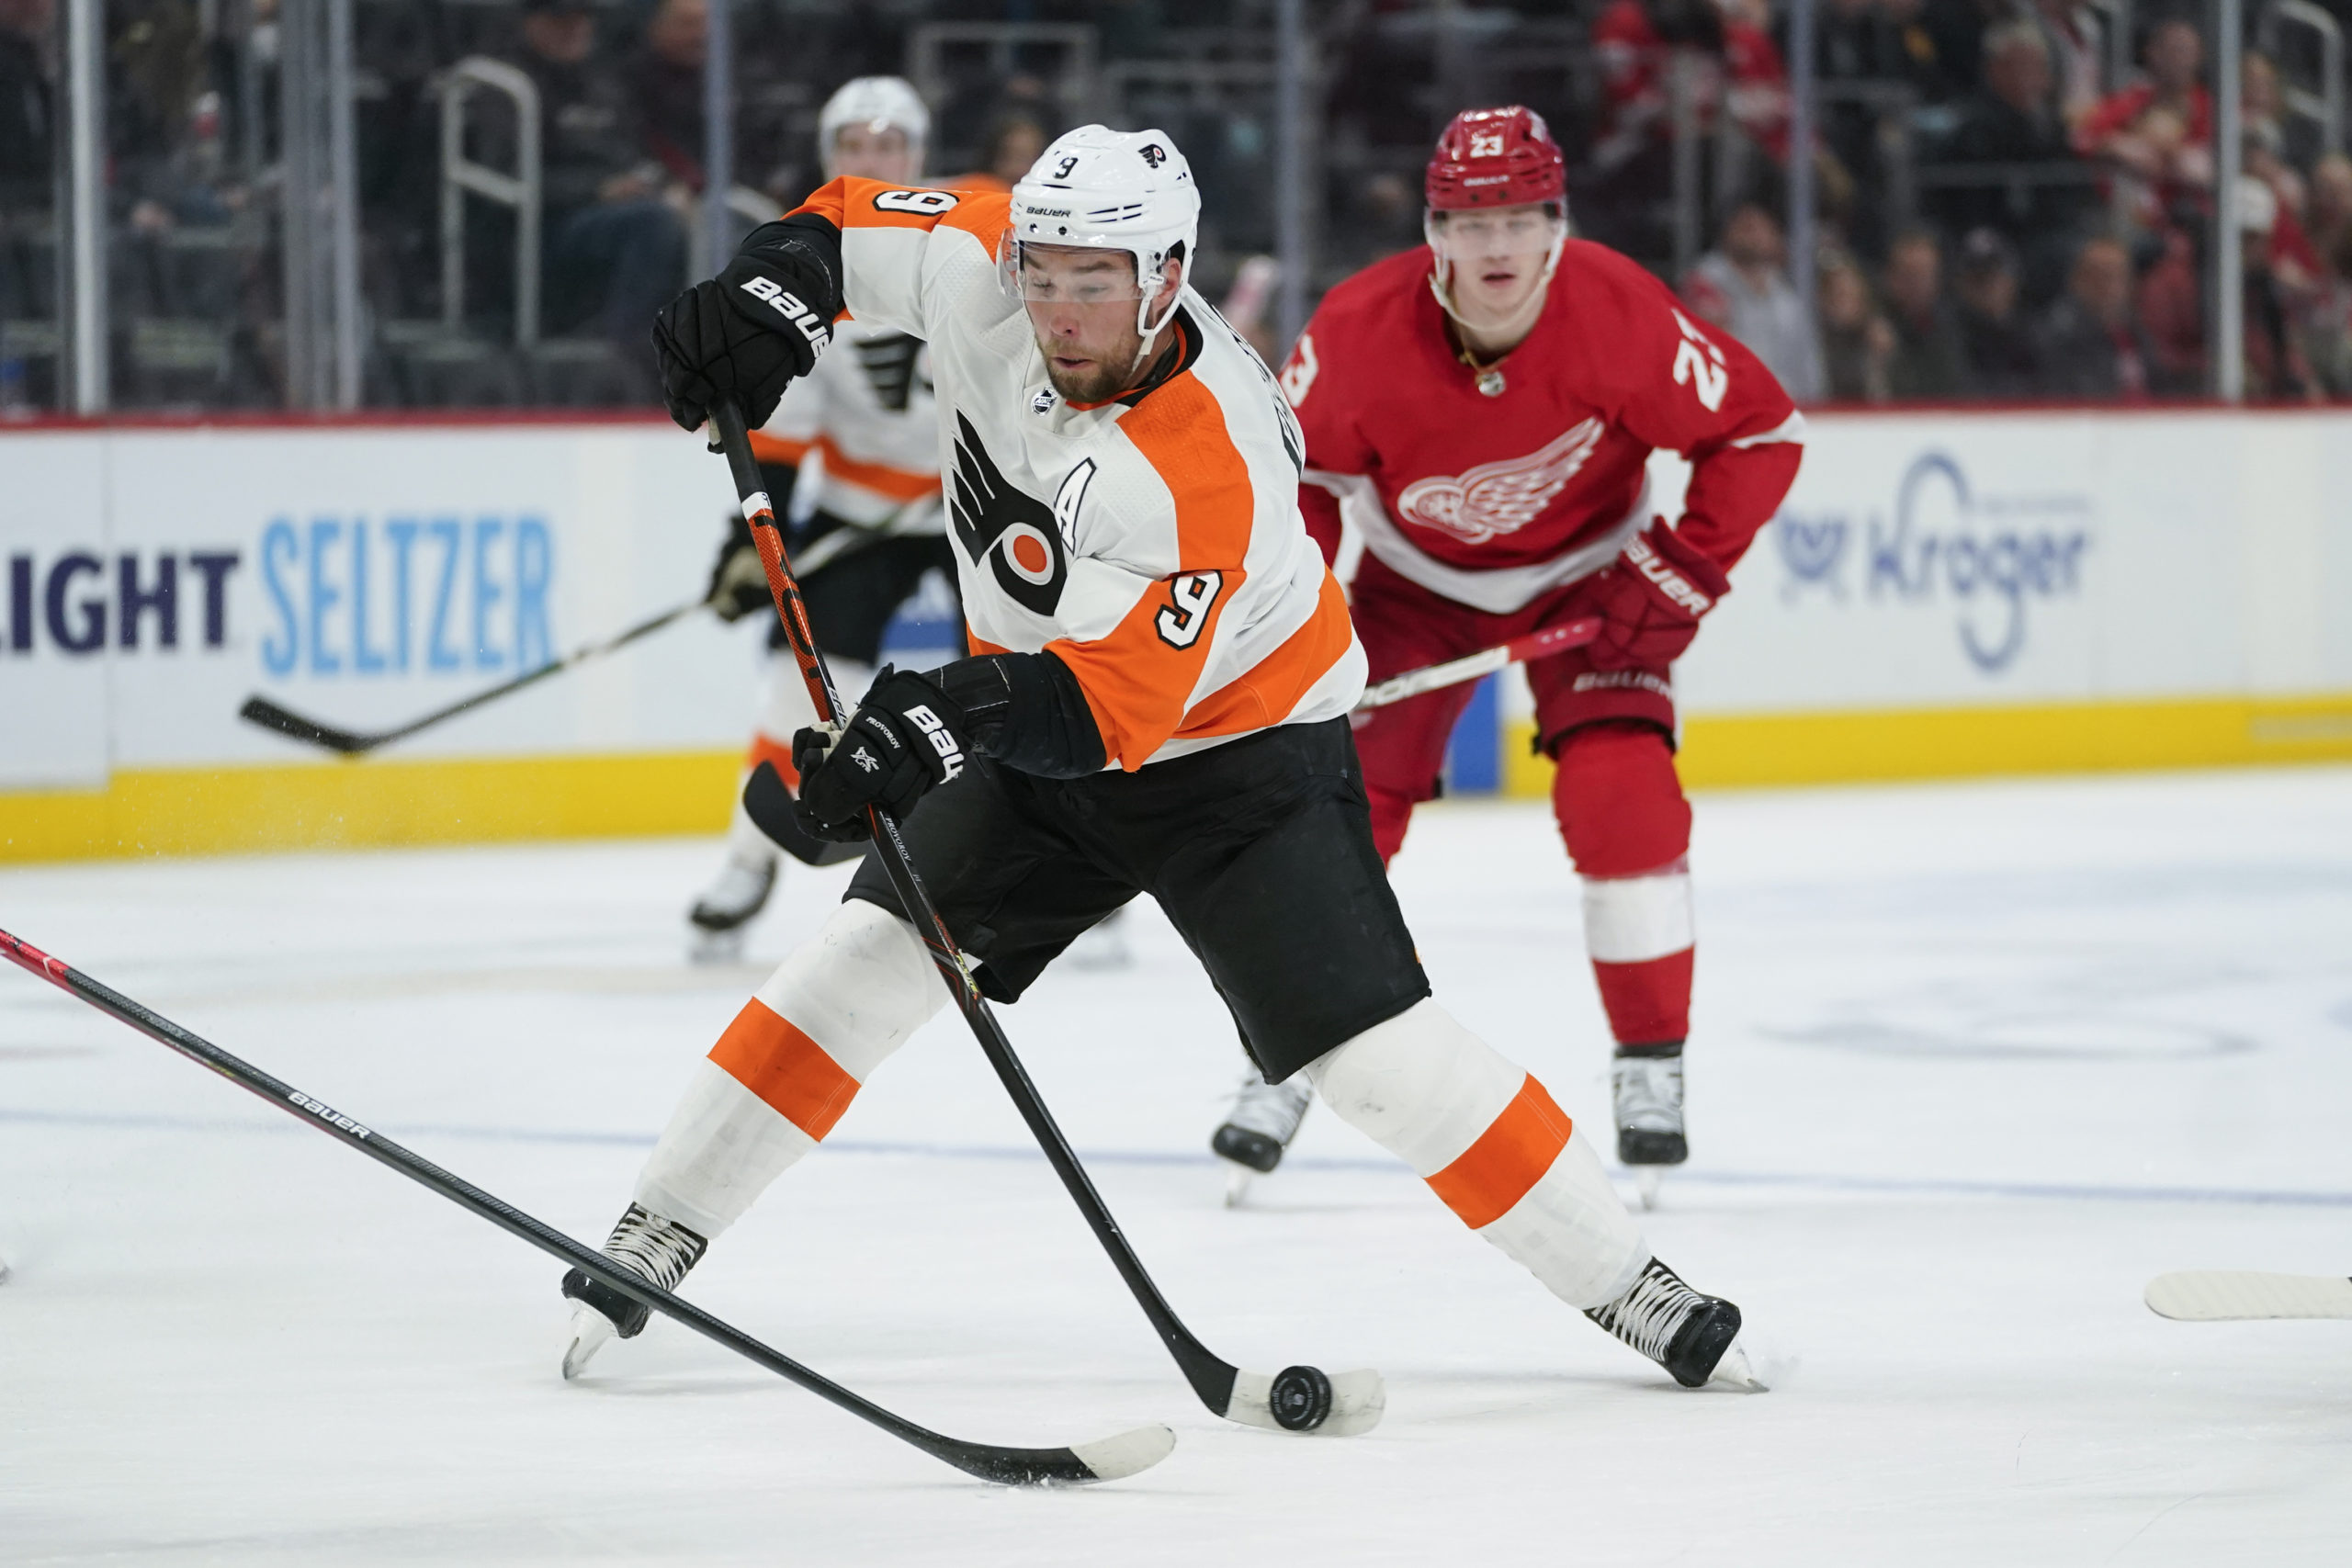 Flyers' Ivan Provorov BOYCOTTS pre-game skate over his refusal to